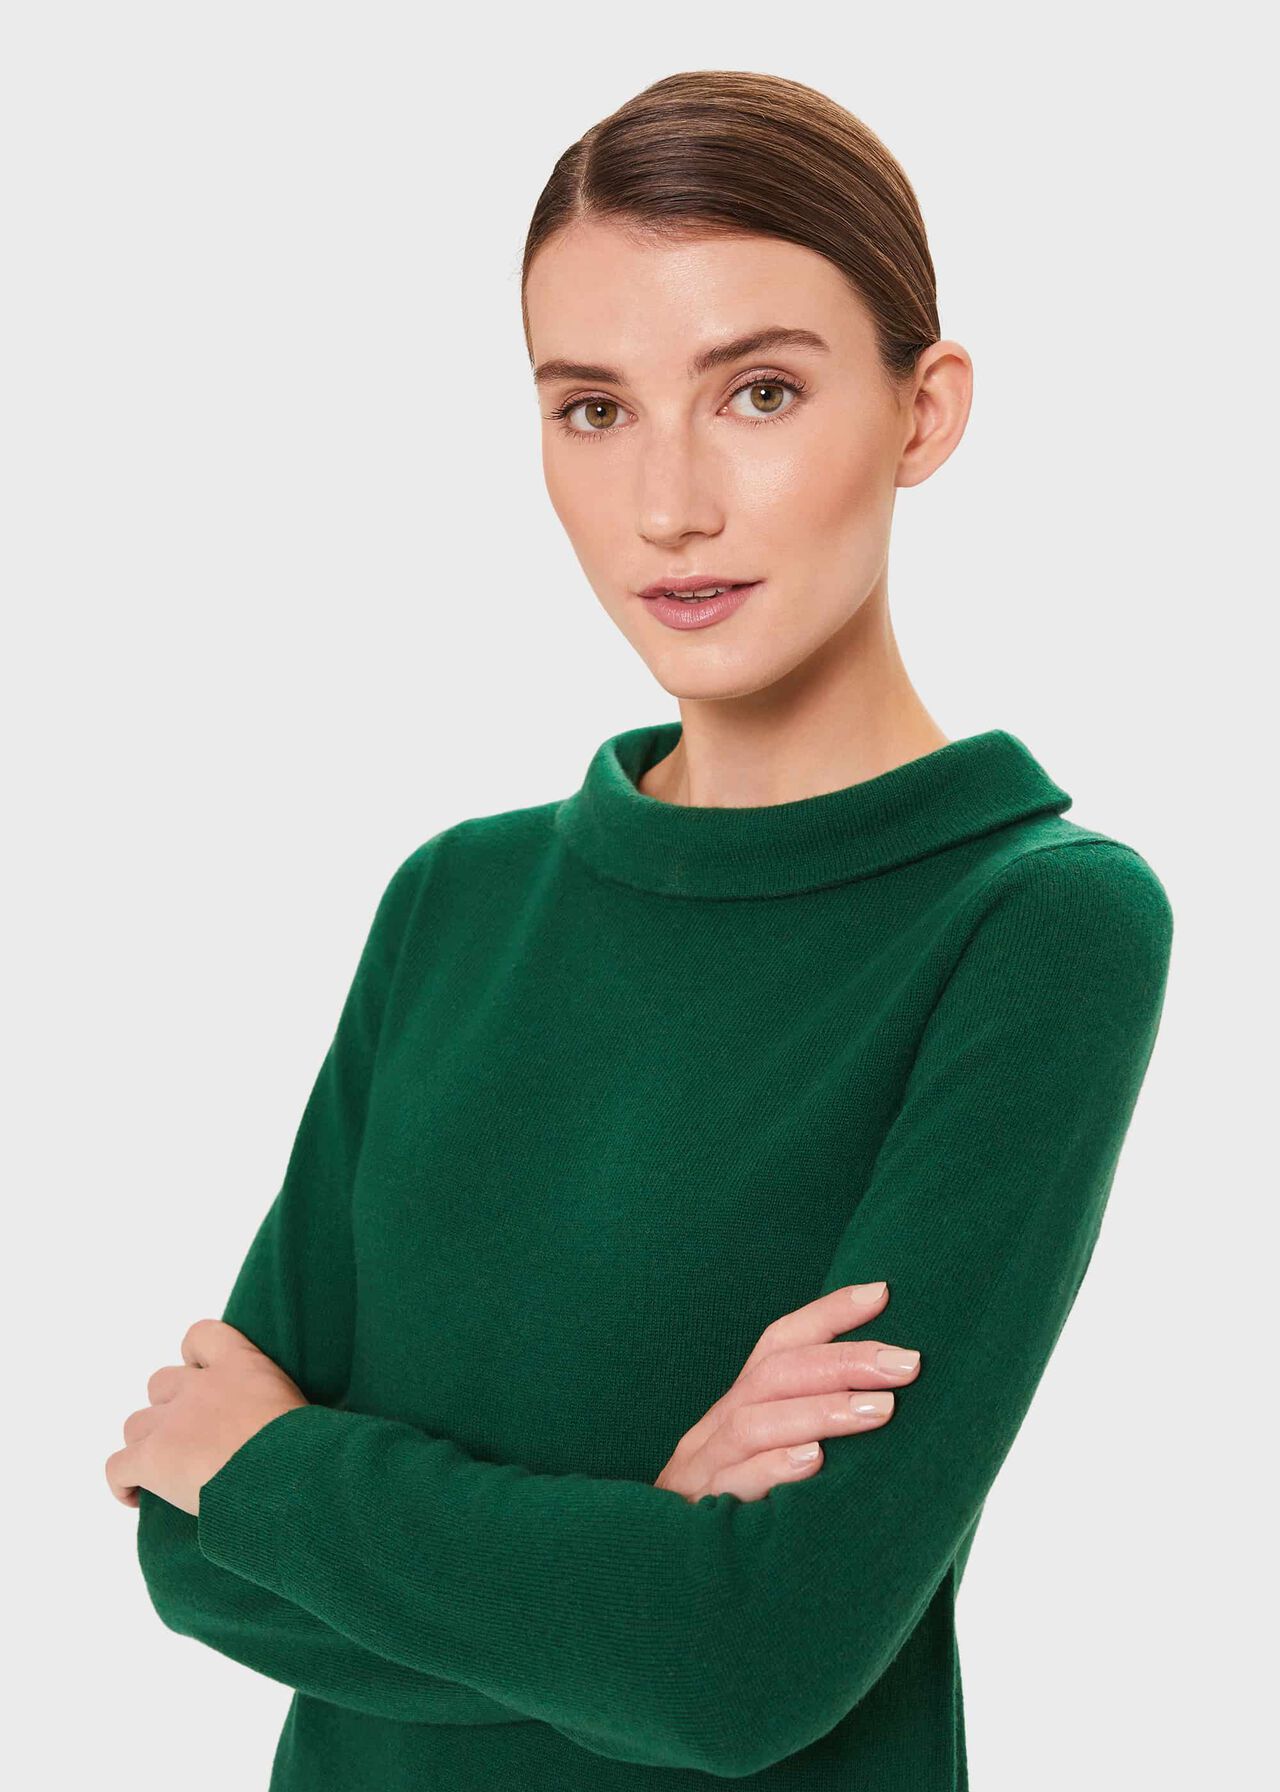 Audrey Wool Cashmere Sweater, Emerald Green, hi-res